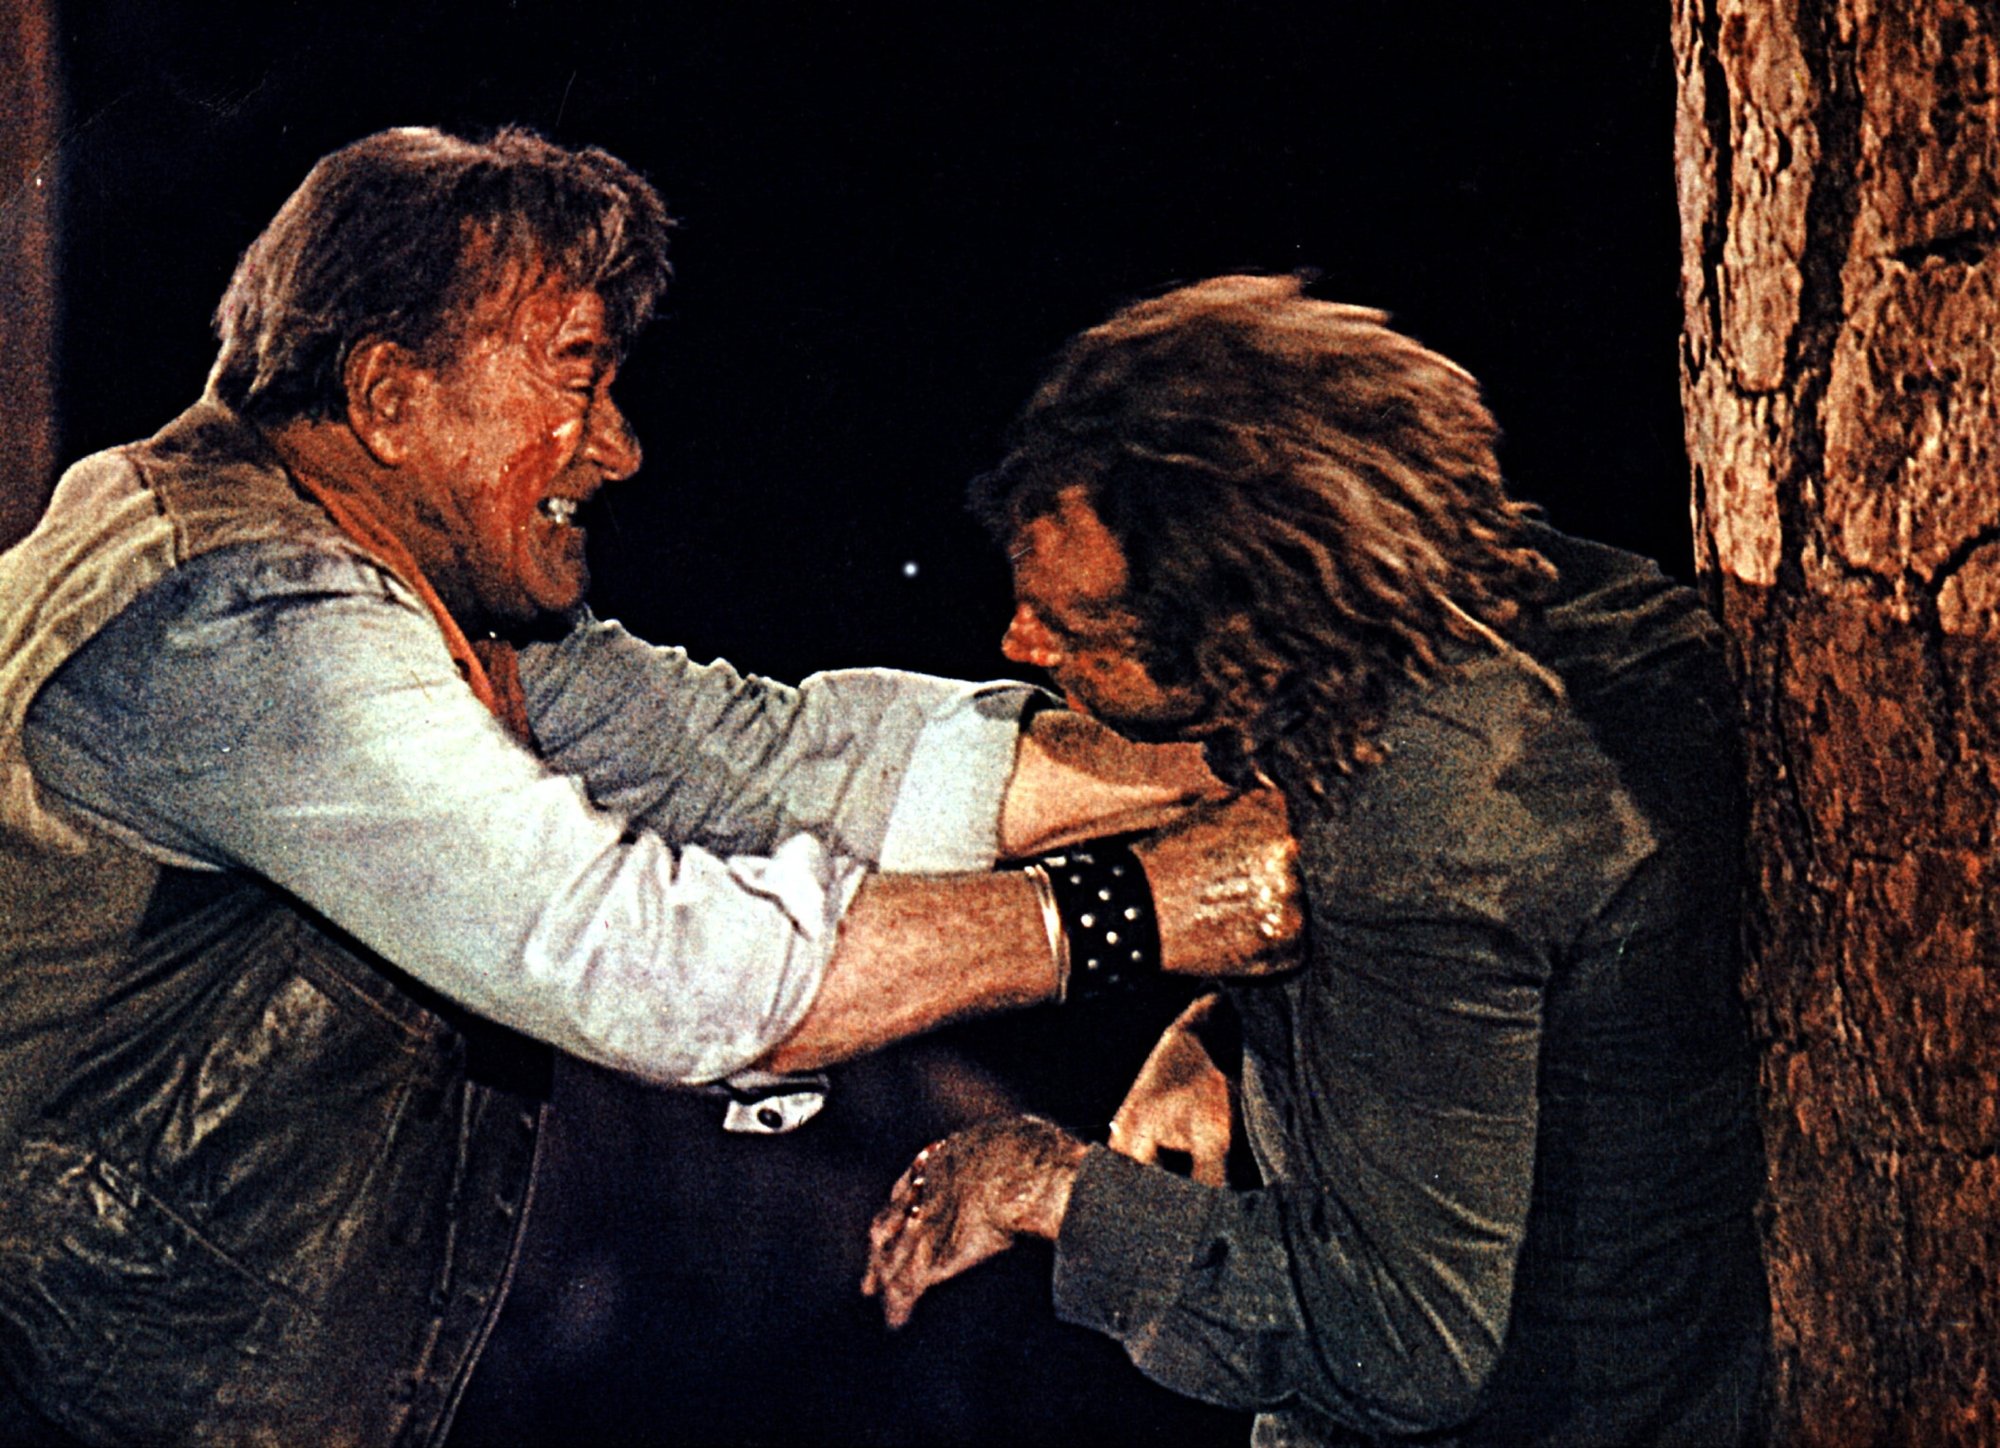 John Wayne and Bruce Dern in 'The Cowboys,' voted as one of the best movie punch scenes. Wayne holds Dern against a tree with them both roughed up.